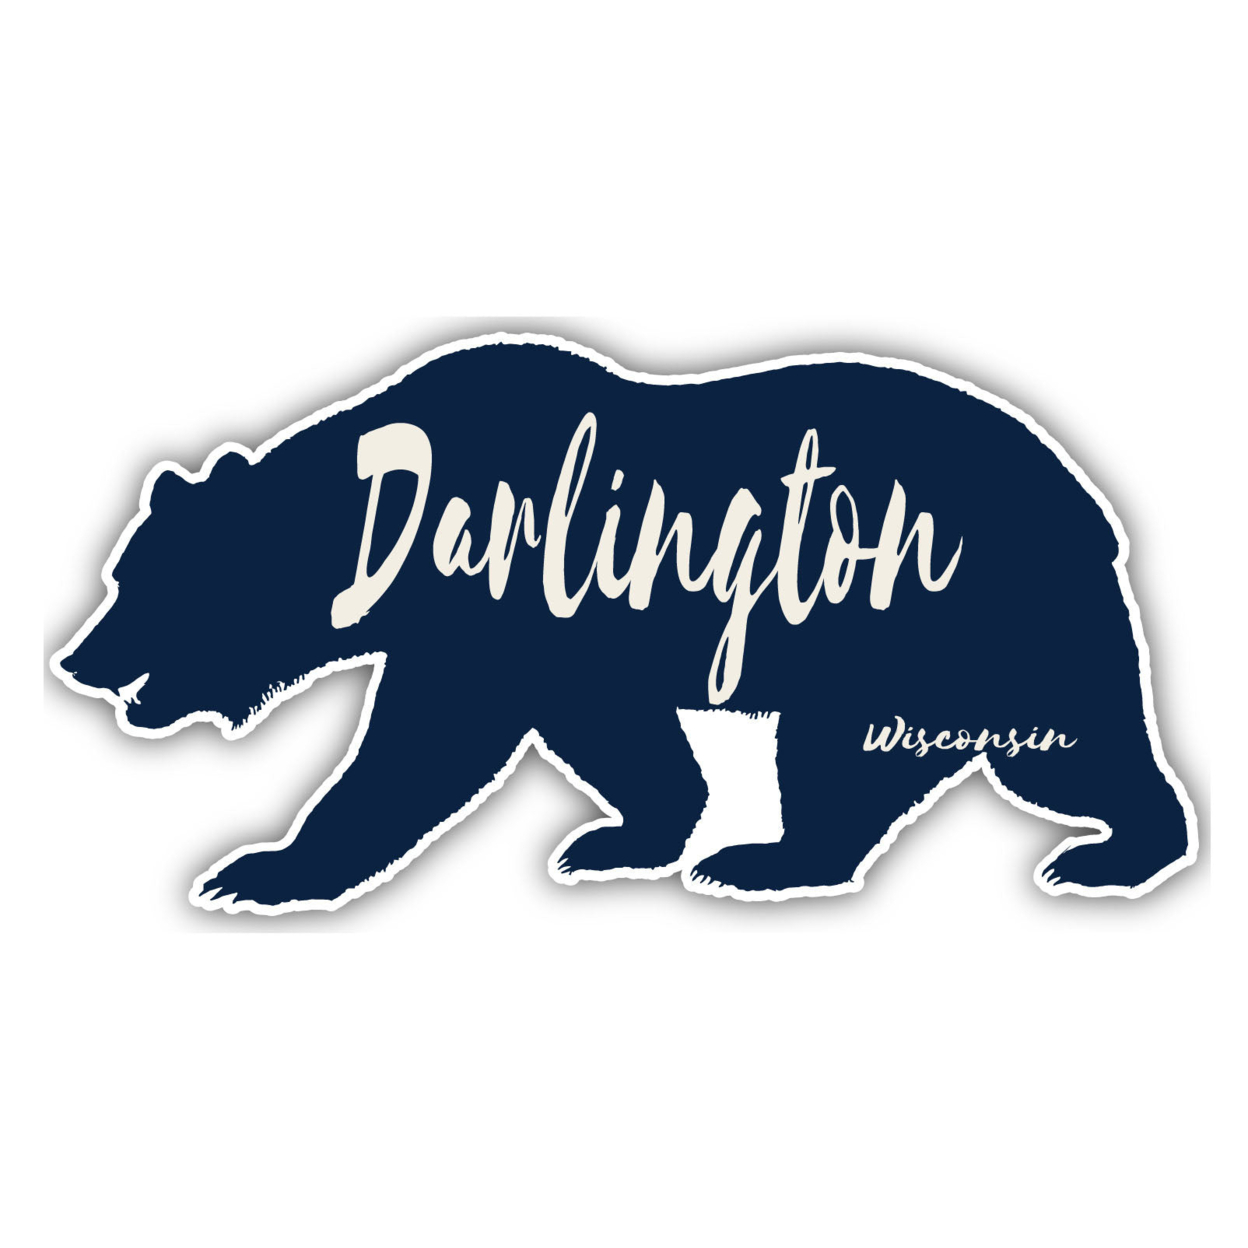 Darlington Wisconsin Souvenir Decorative Stickers (Choose Theme And Size) - 4-Pack, 10-Inch, Bear